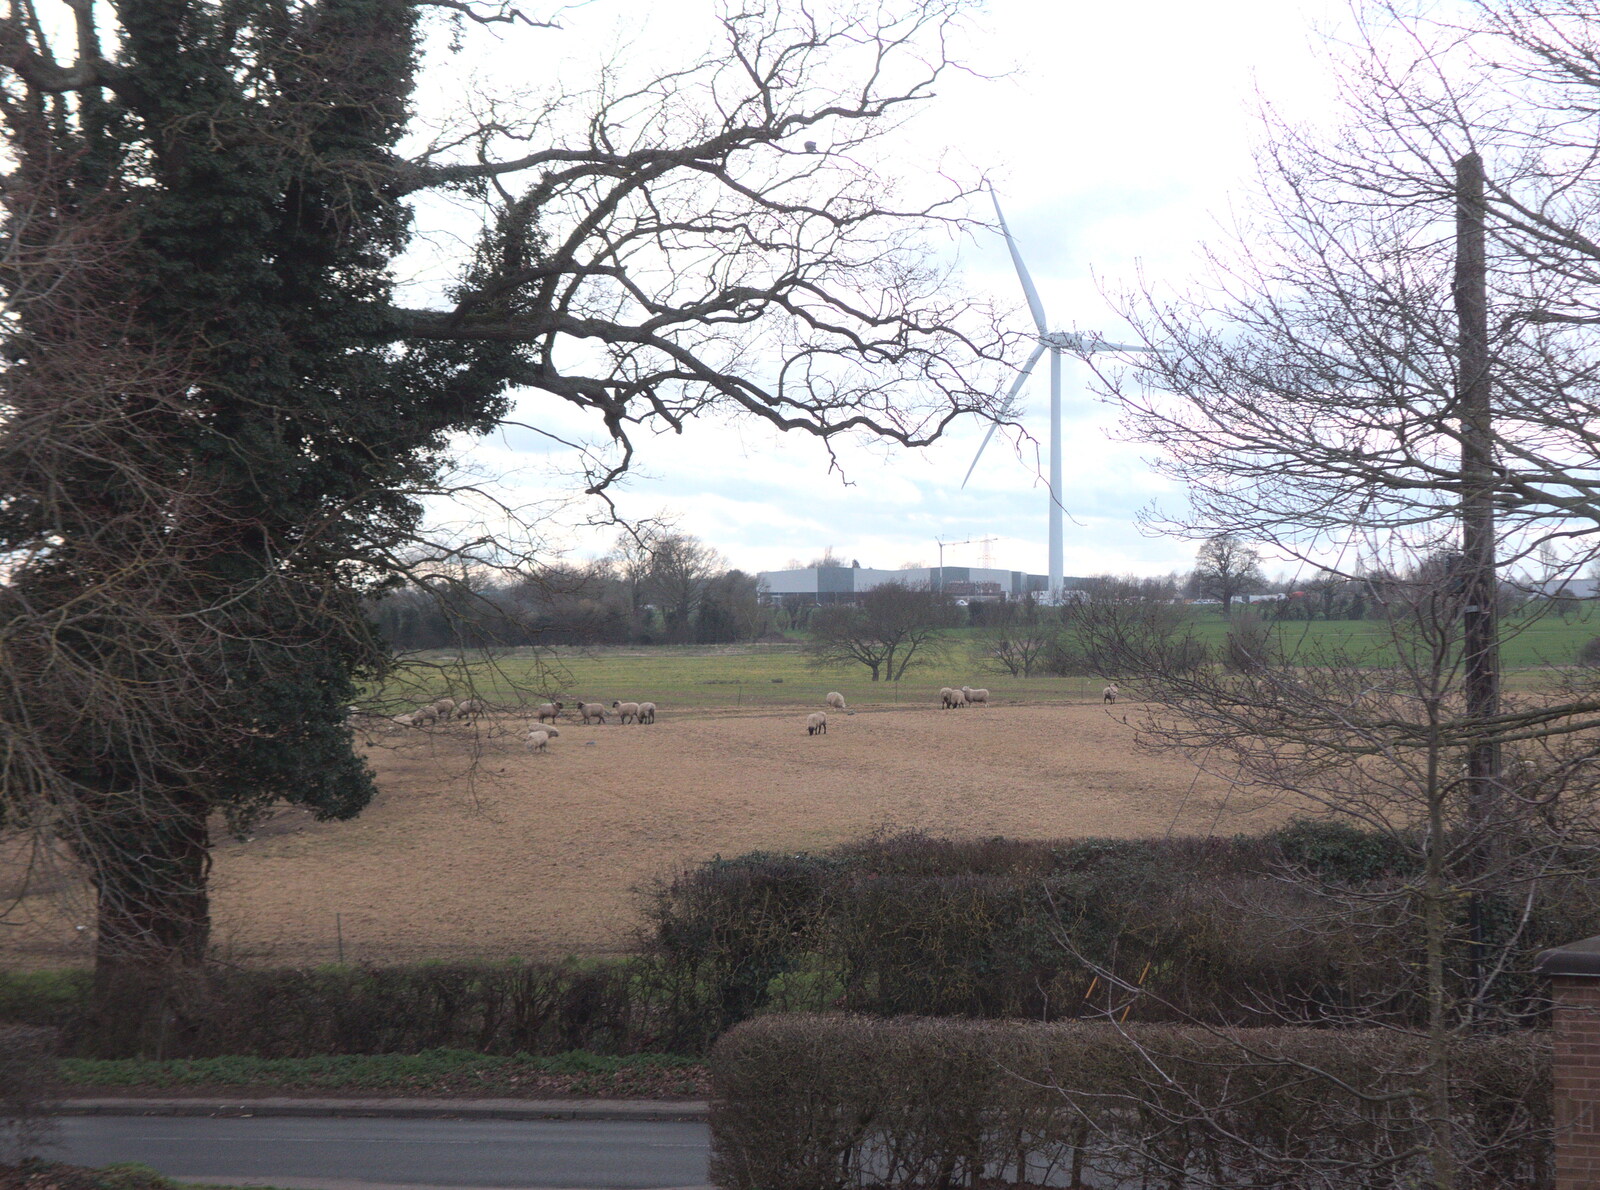 Grandad's new view has some sheep in it from The G-Unit Moves In, Eye, Suffolk - 4th March 2019